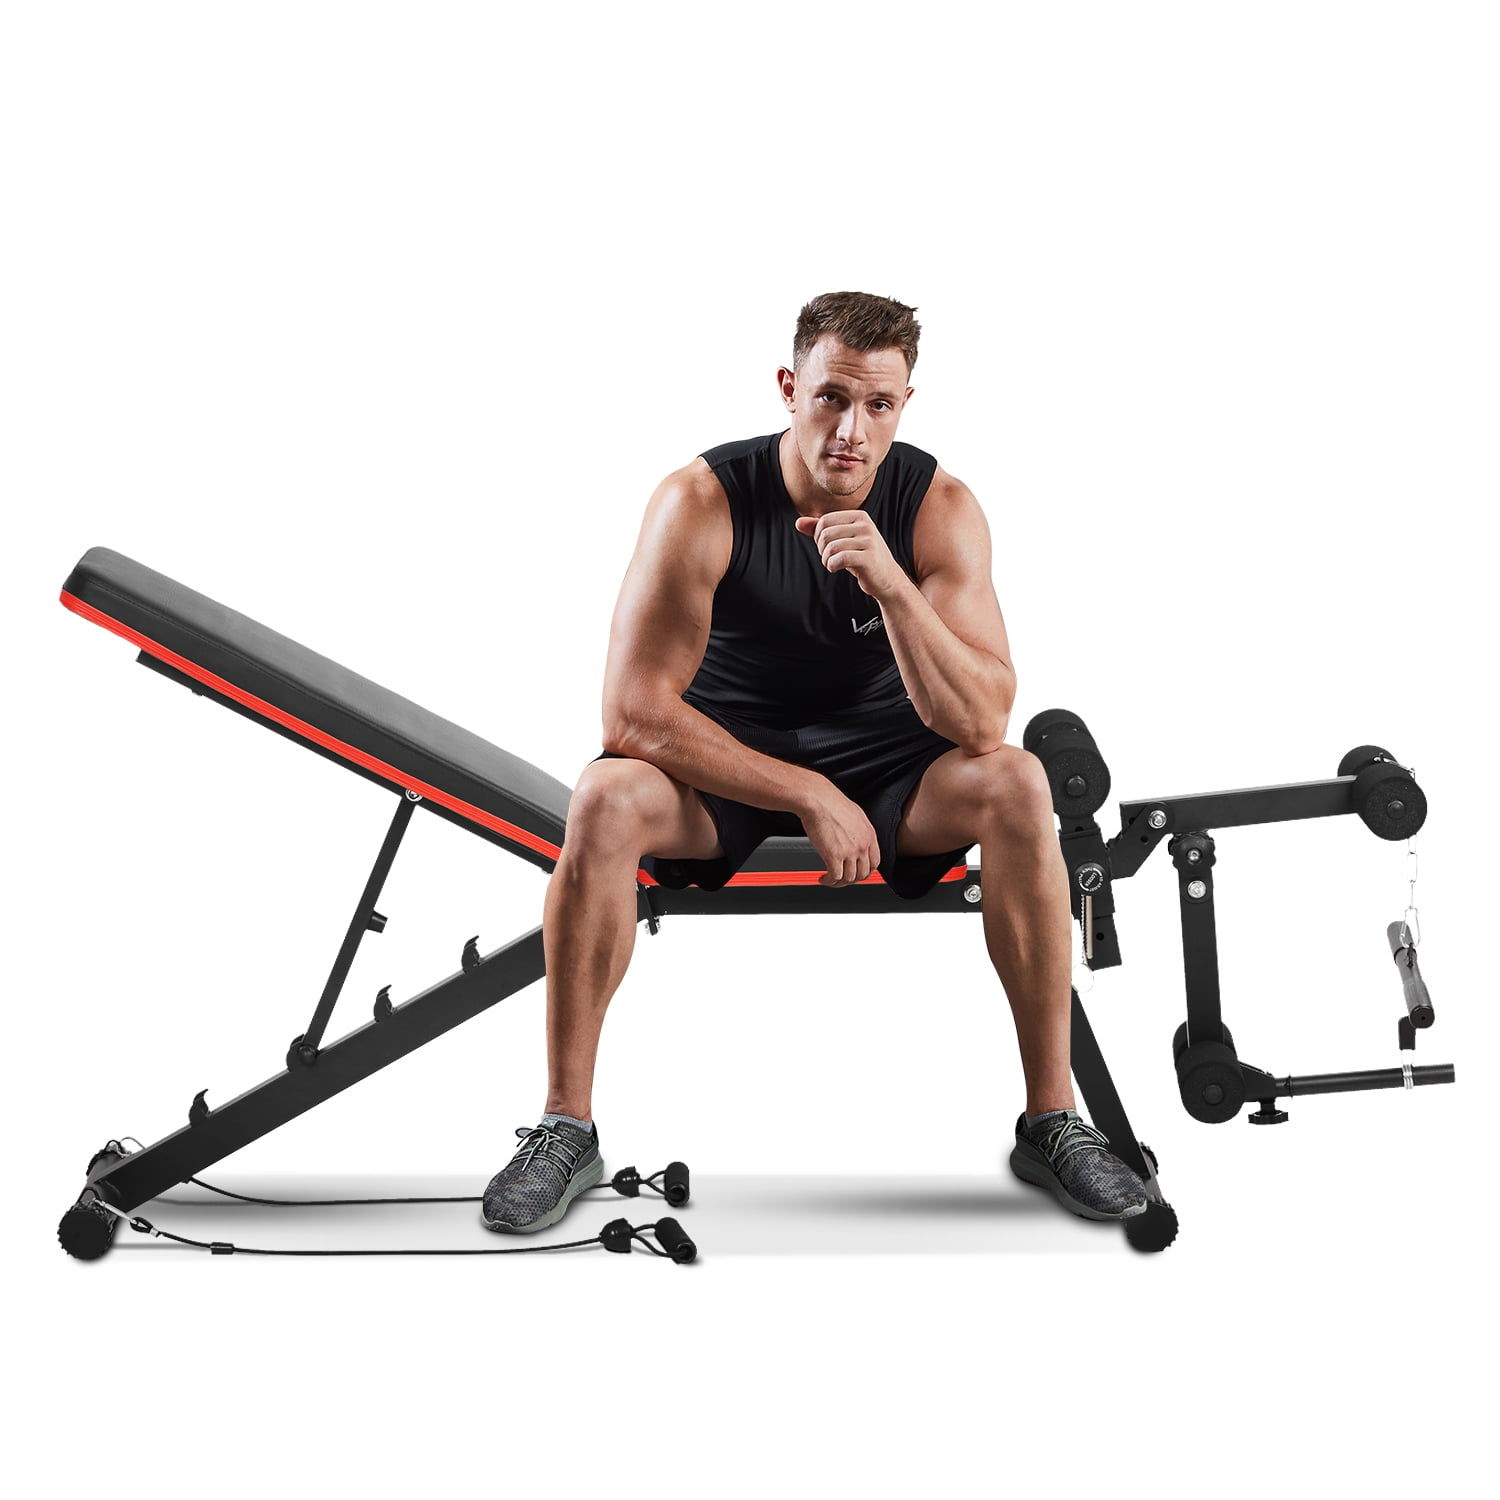 Adjustable Leg Lifts for Home Office Details about   Multifunctional Sit Up Bench with Handle